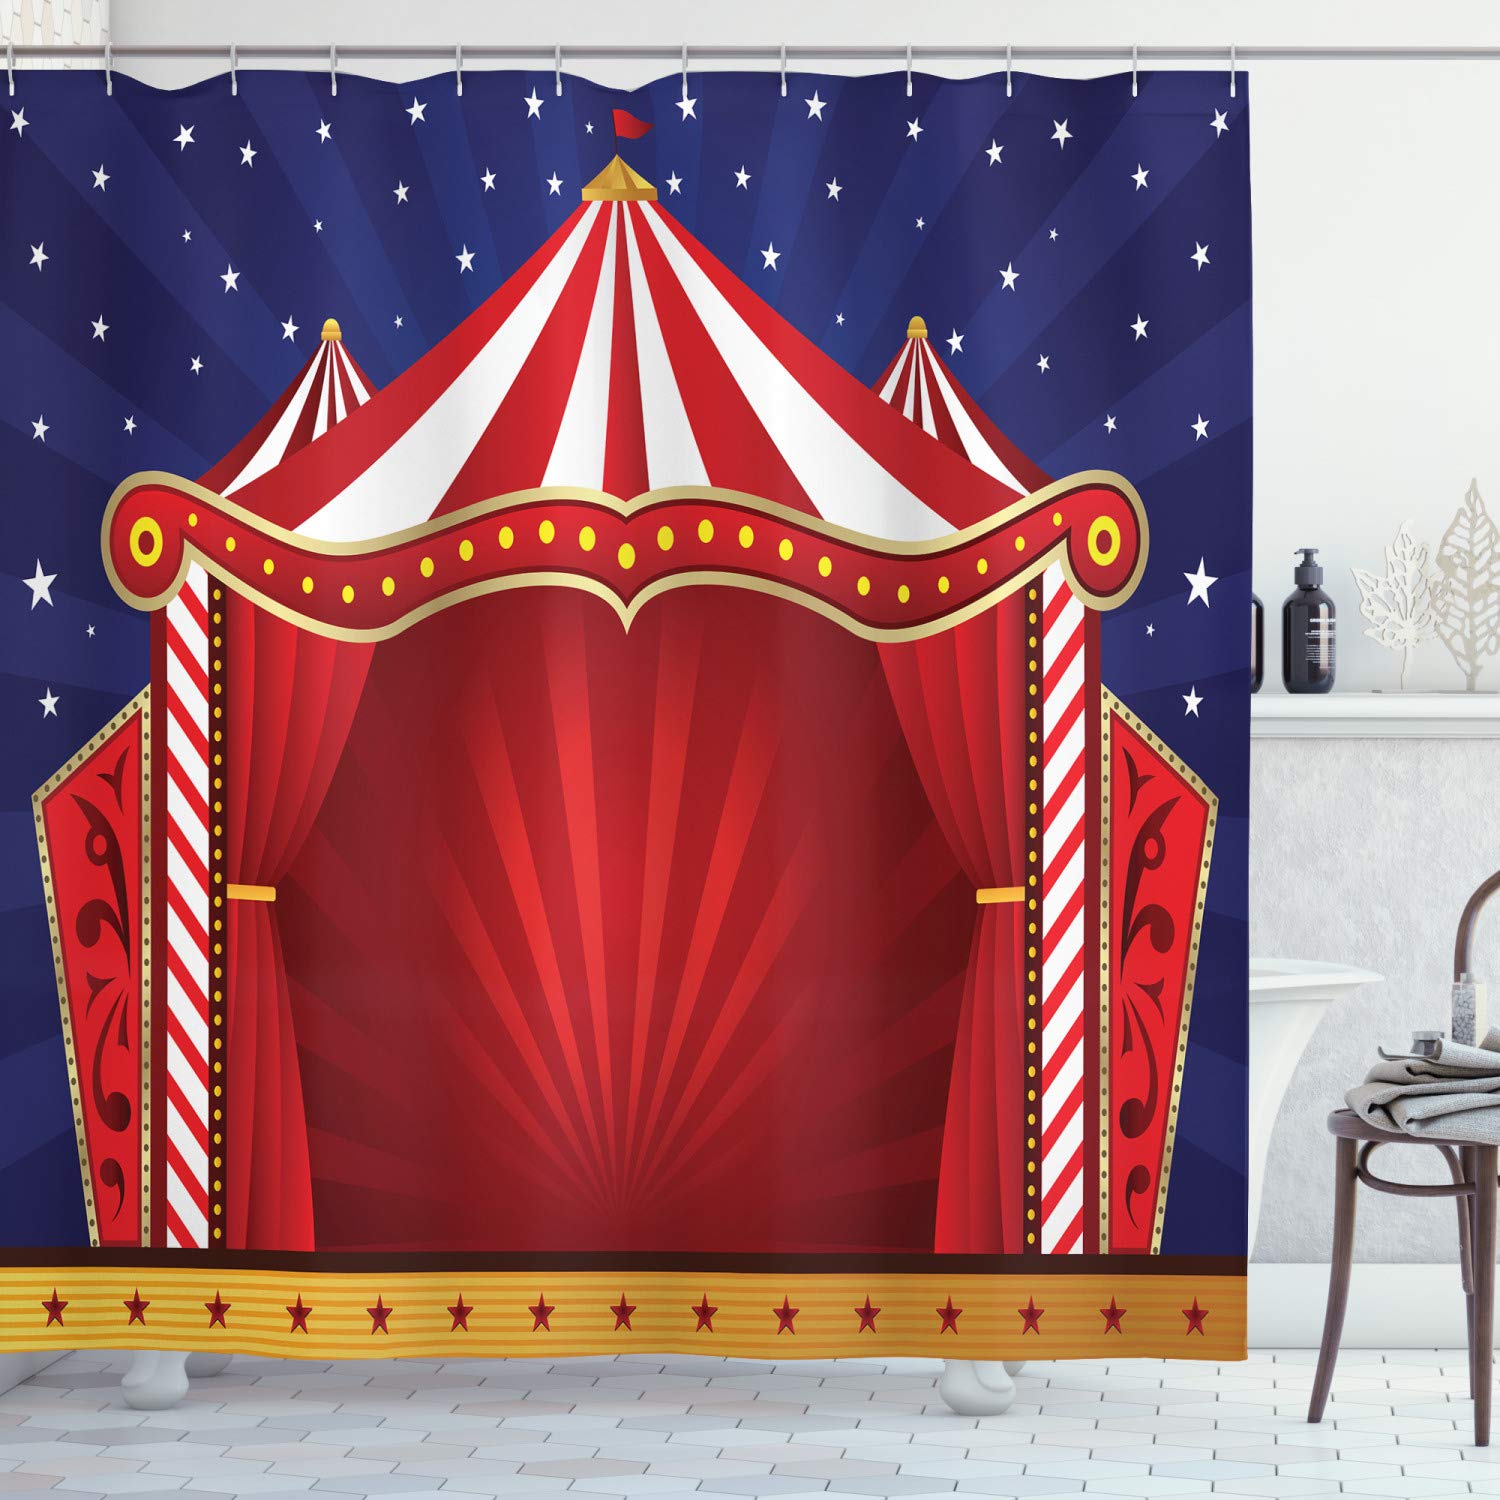 Ambesonne Circus Decor Collection, Canvas Tent Circus Stage Performing Theater Jokes Clown Cheerful Night Theme Print, Polyester Fabric Bathroom Shower Curtain Set with Hooks, Navy Blue Red